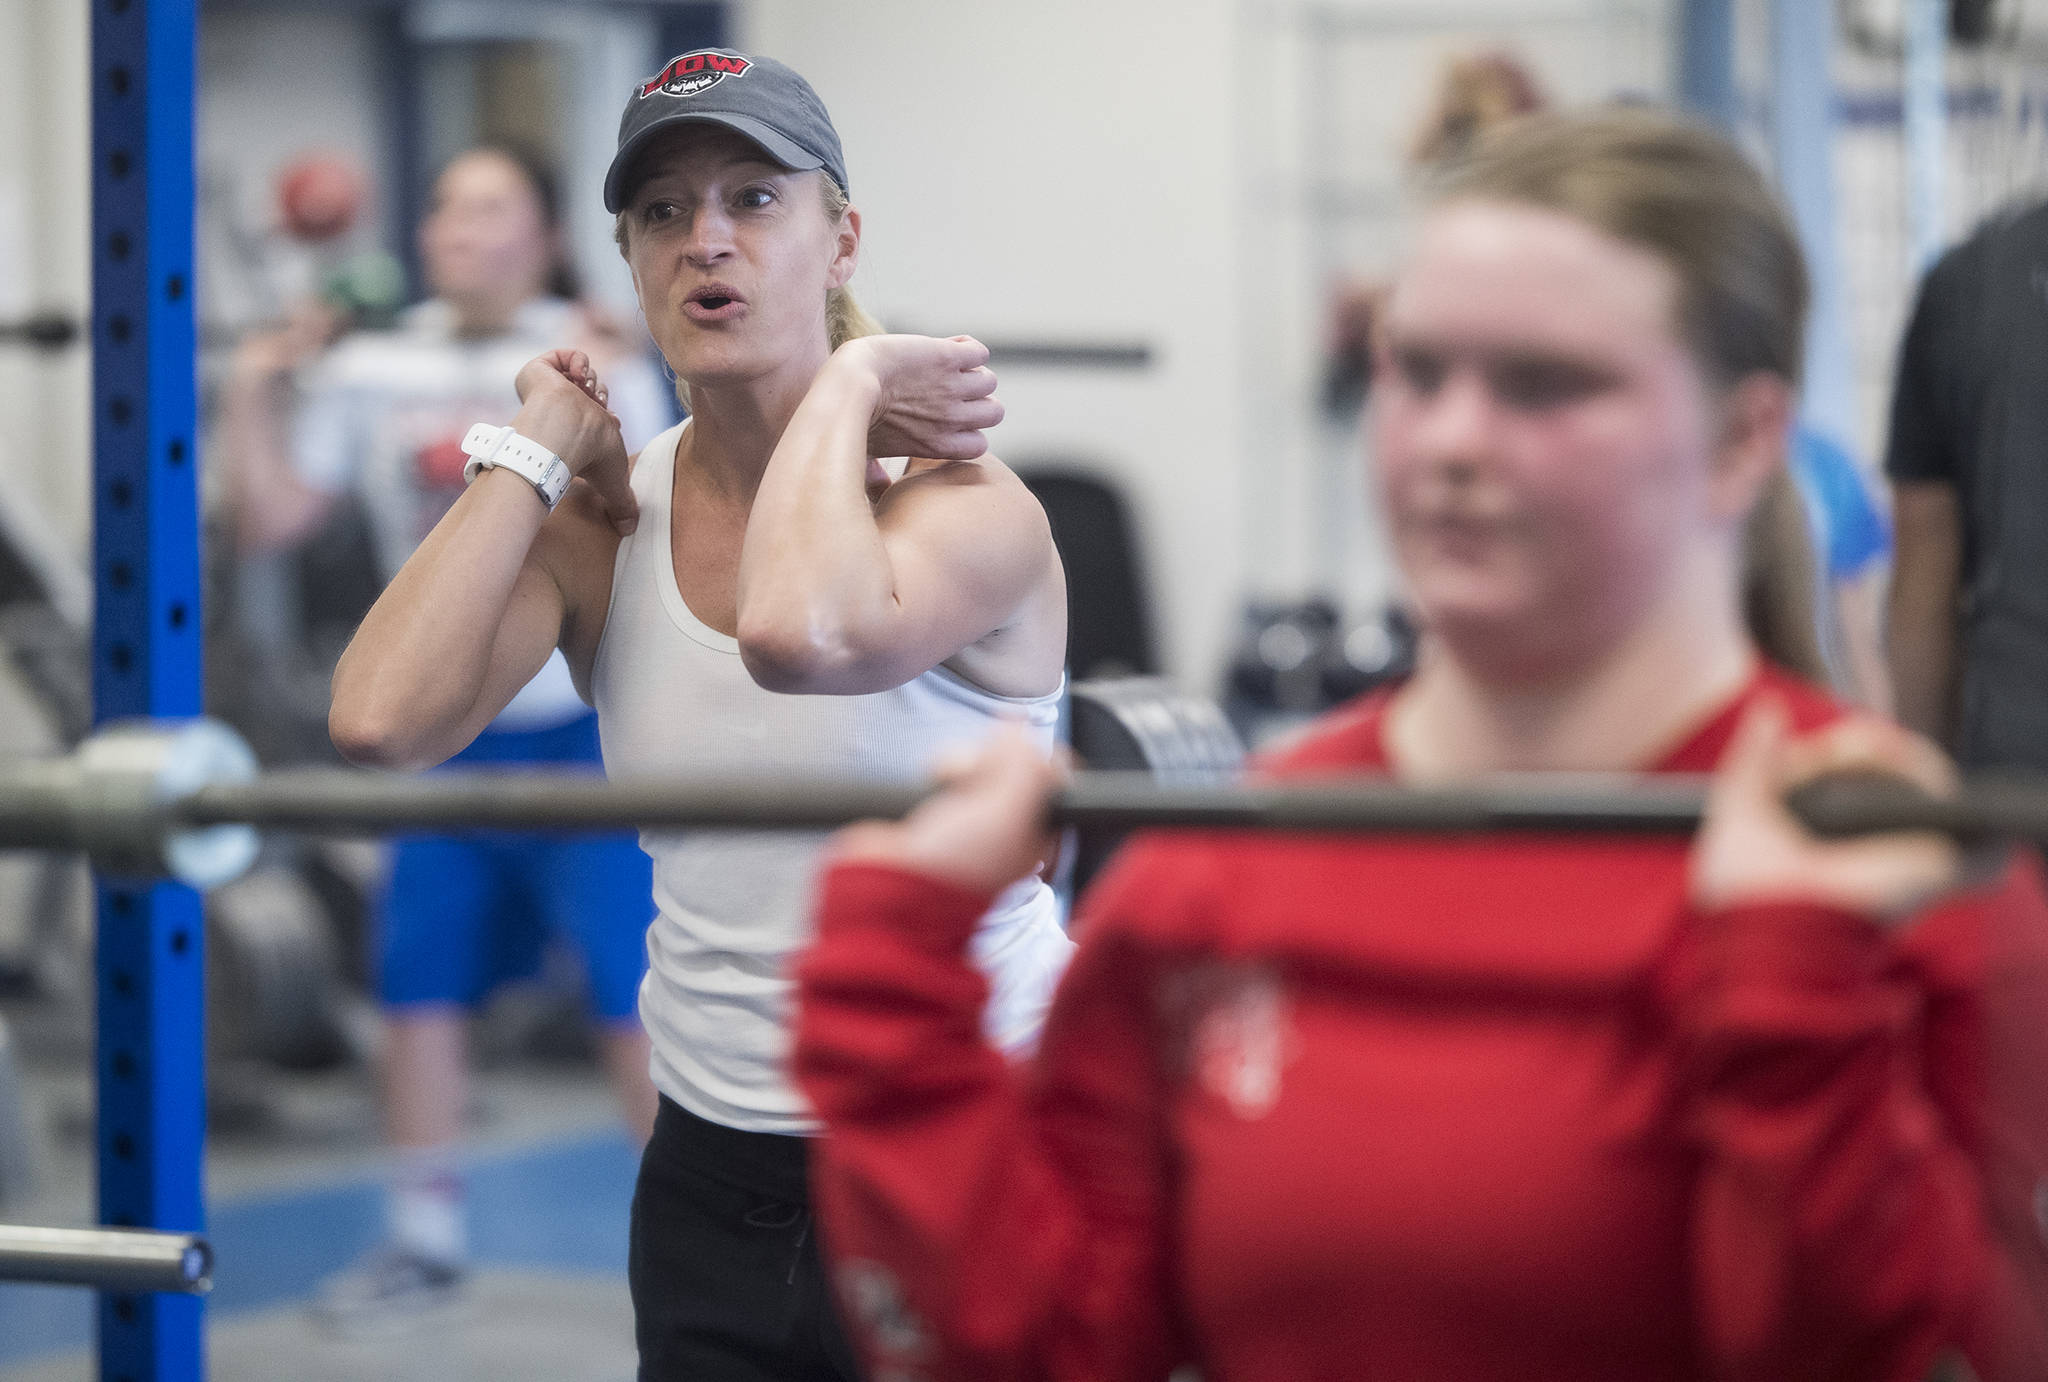 Cori Metzgar, Director of Sports Performance at Western Oregon University and host of the Juneau Football and Sports Performance Camp, gives Ariana Connally encouragement lifting weights at the Thunder Mountain High School last July. (Michael Penn | Juneau Empire File)